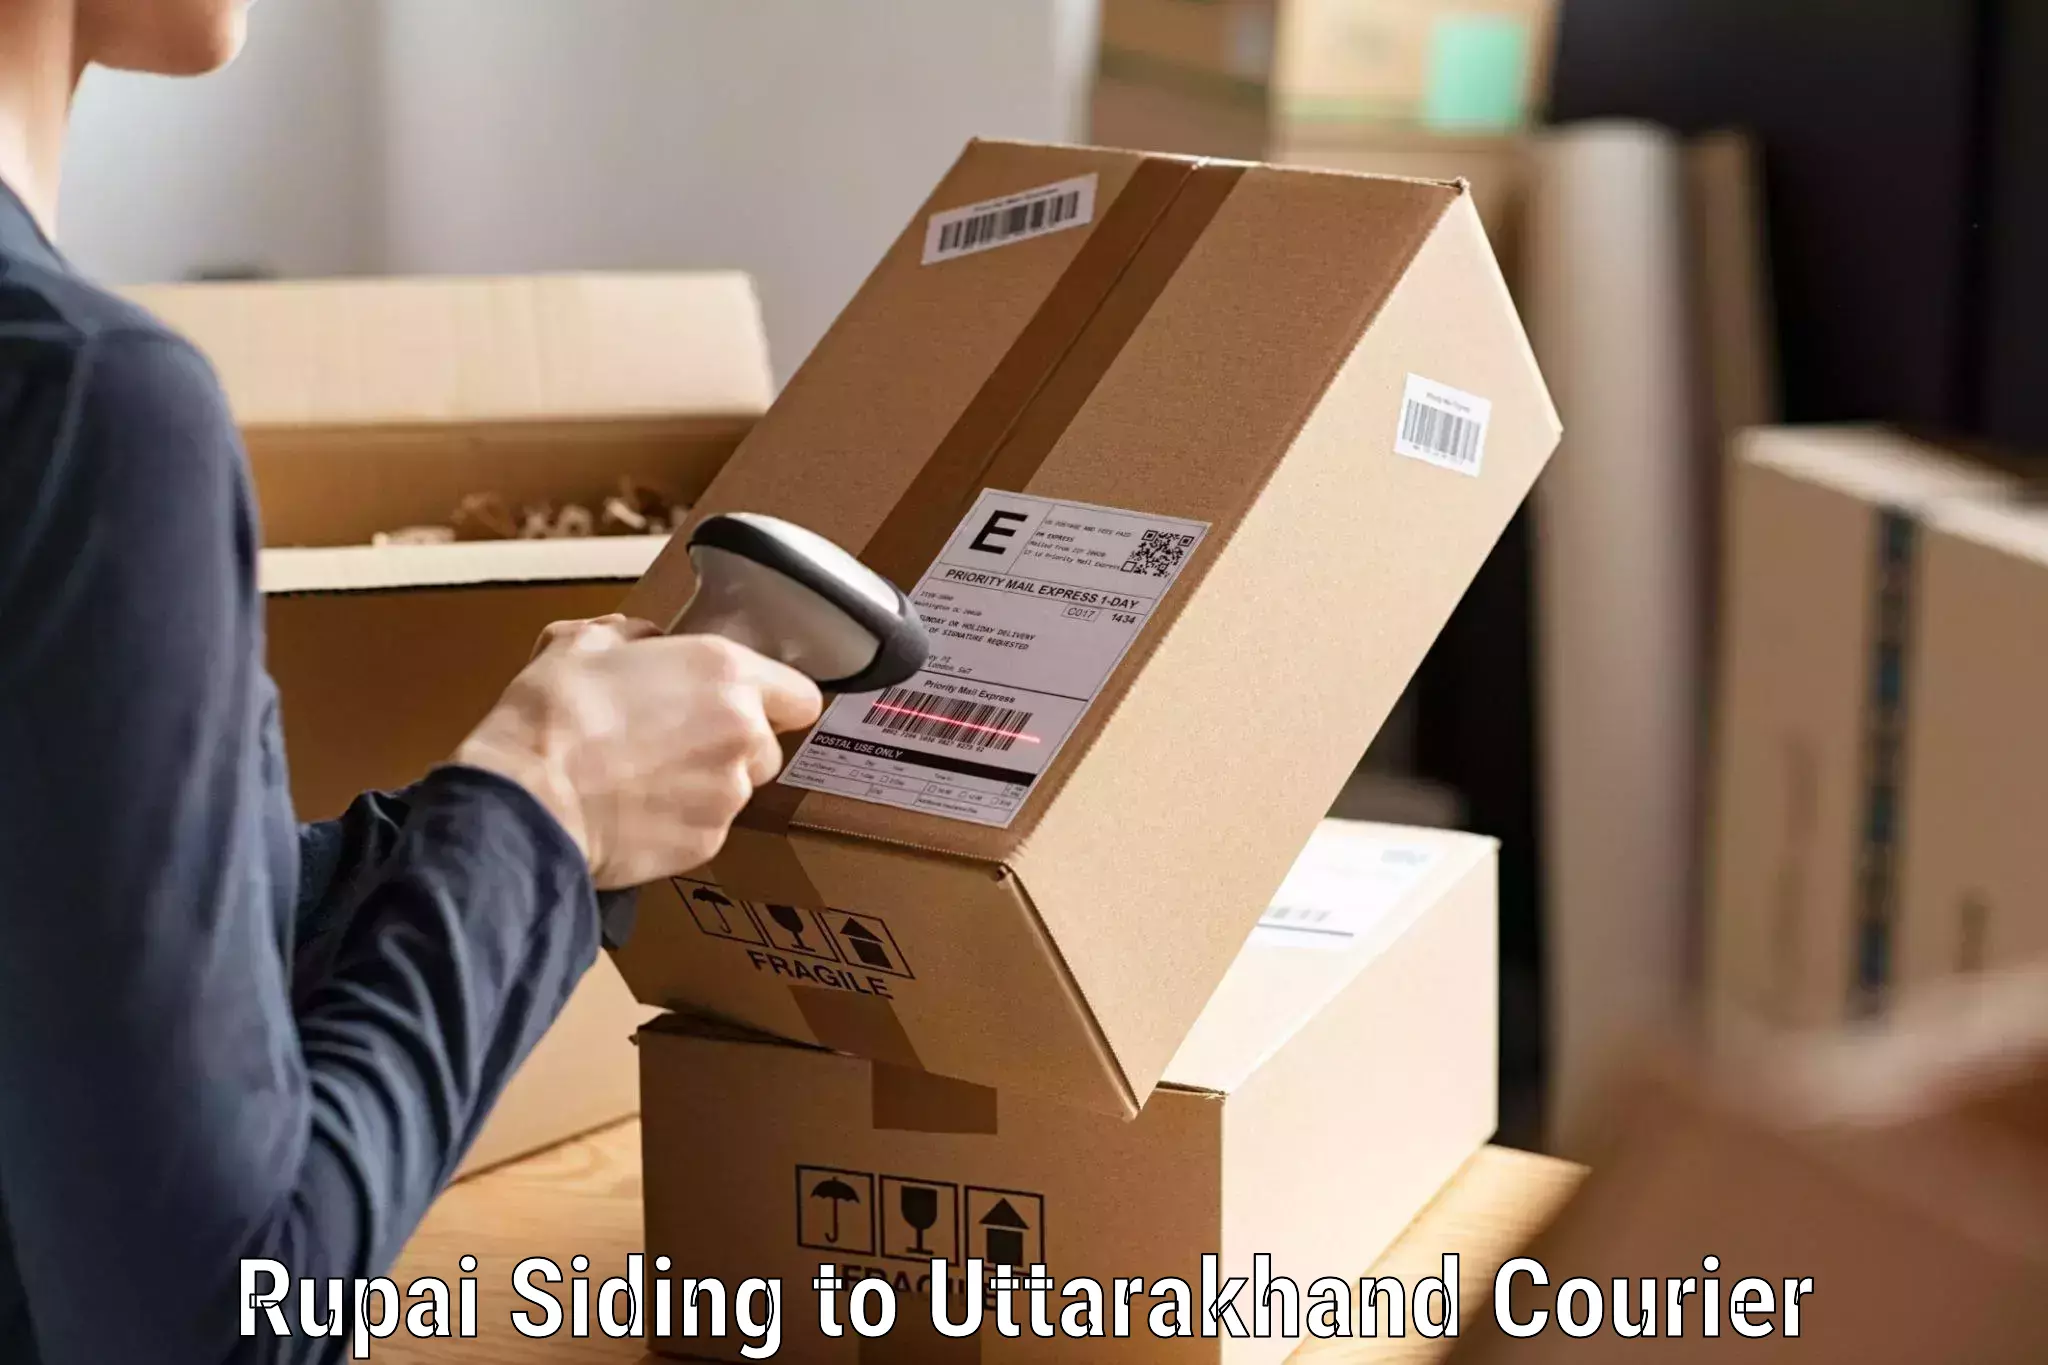 Reliable delivery network Rupai Siding to Pithoragarh